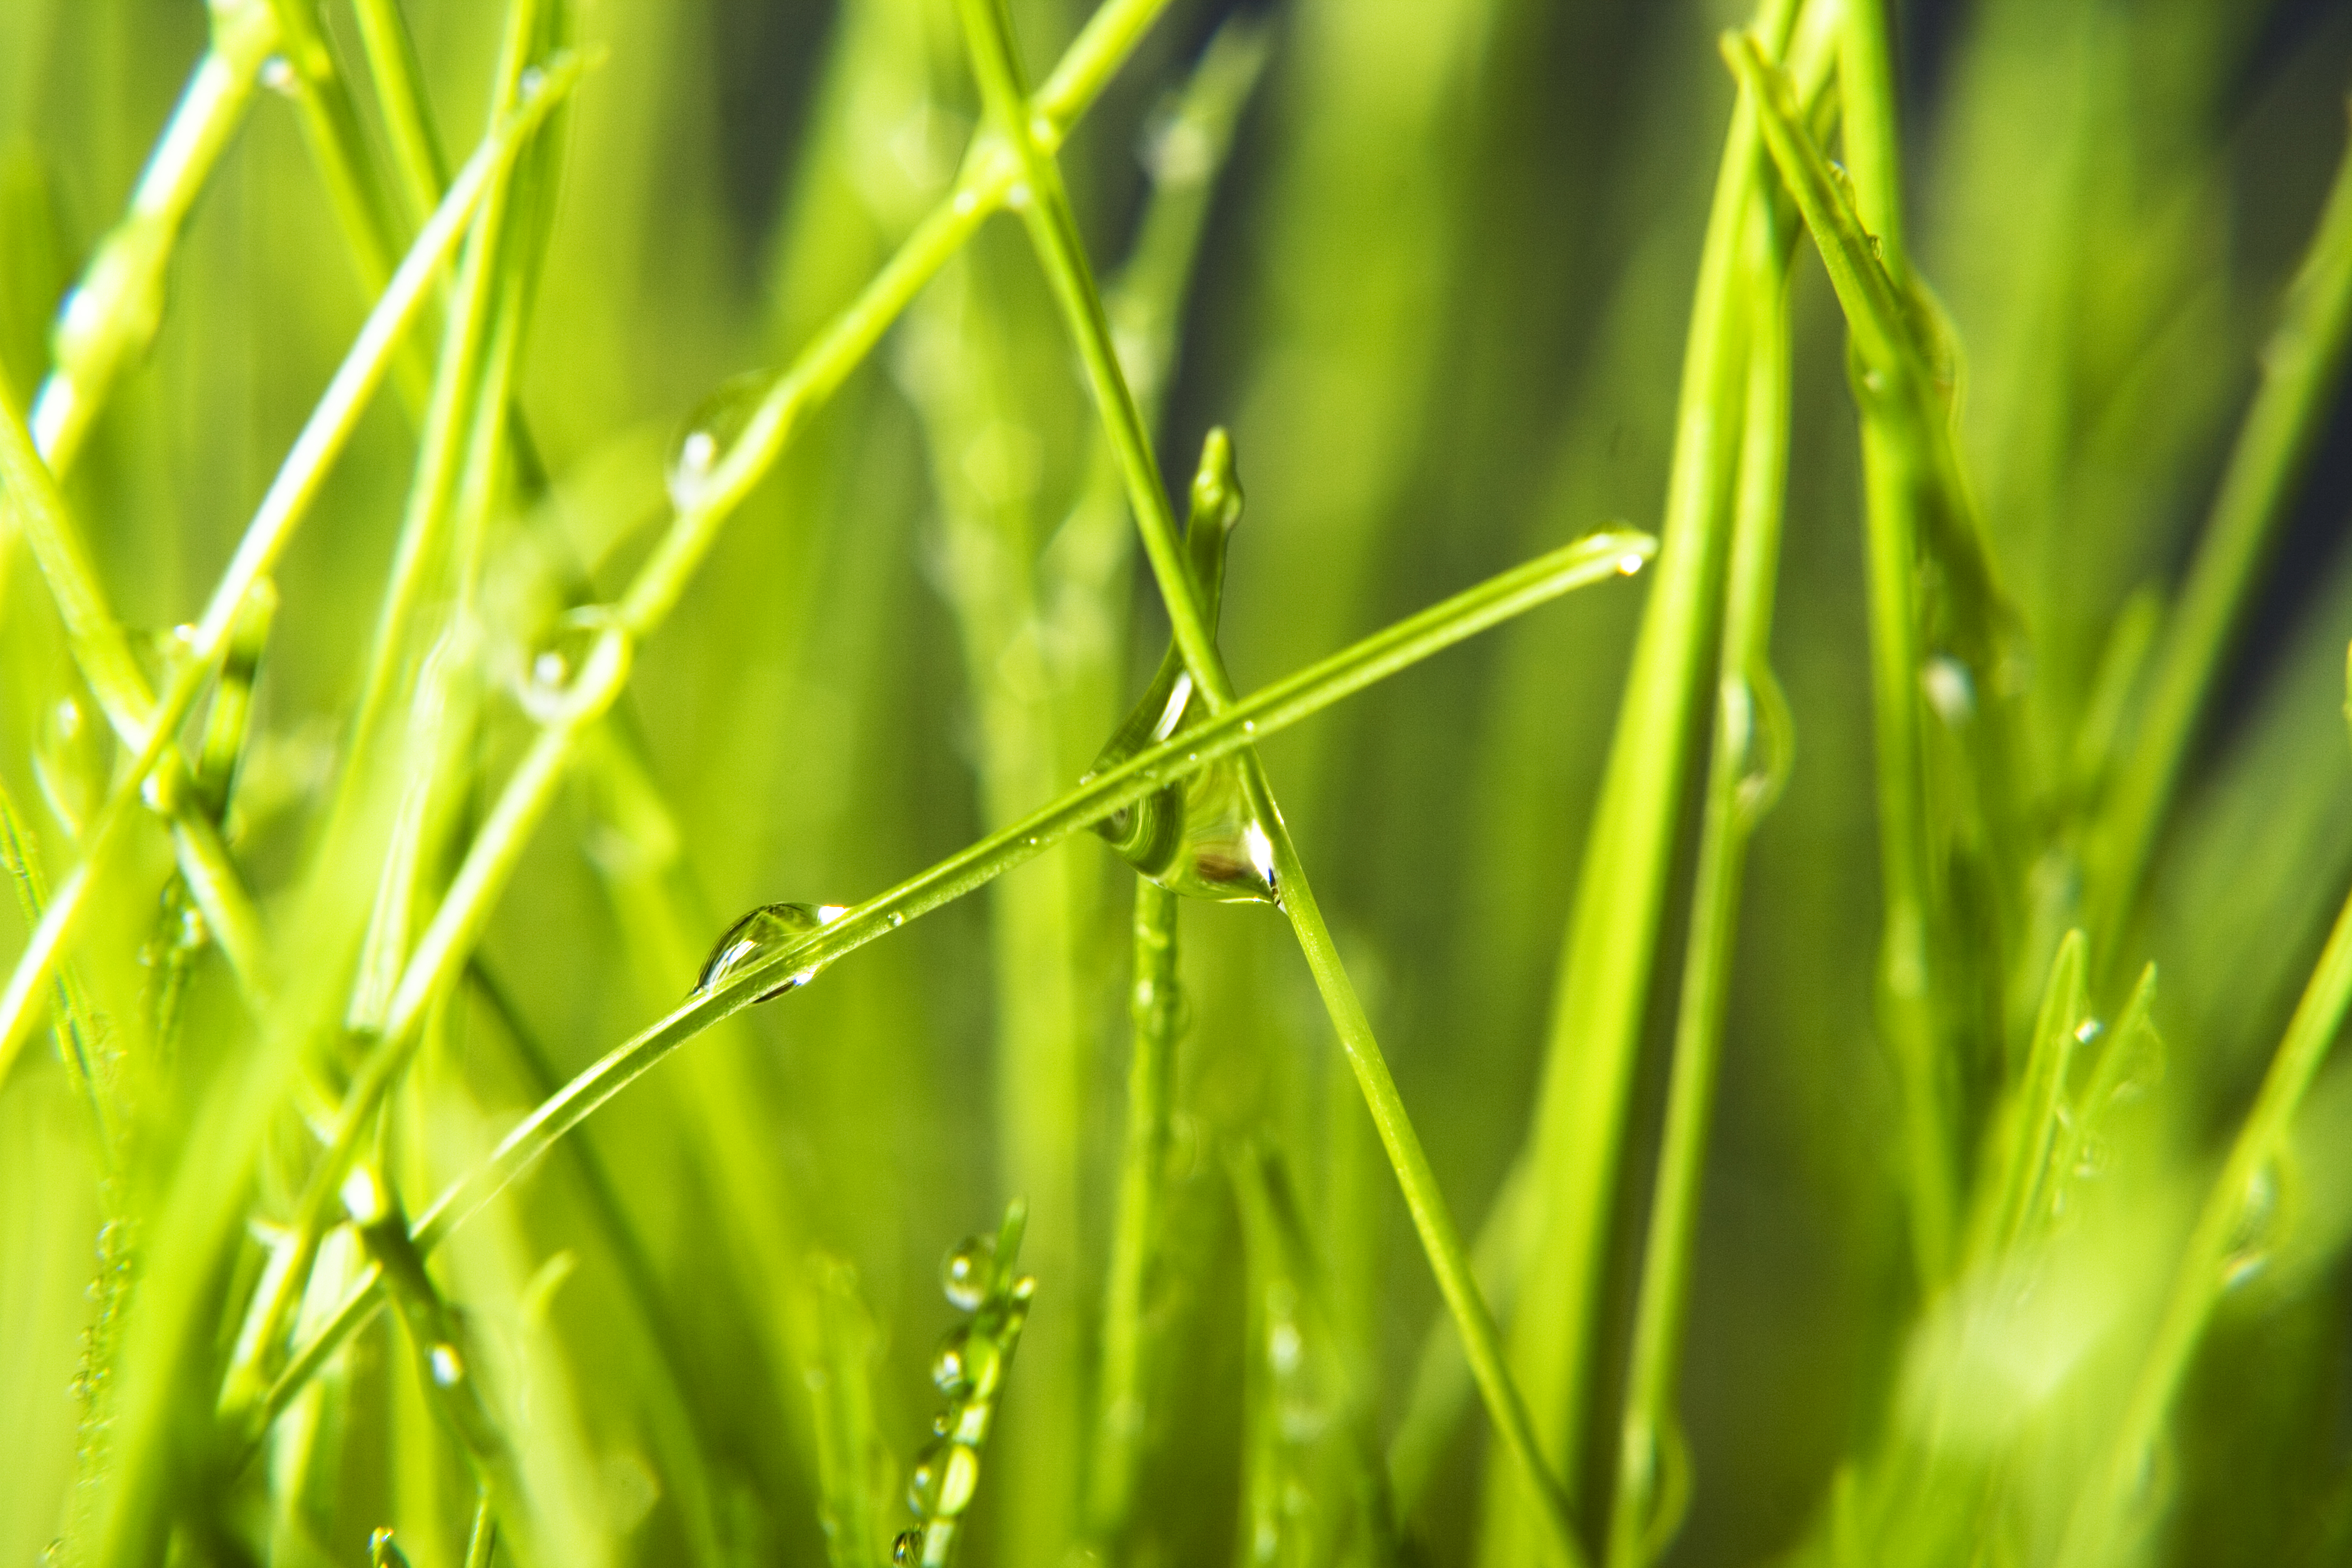 Wet grass, Abstract, Spring, Meadow, Nature, HQ Photo